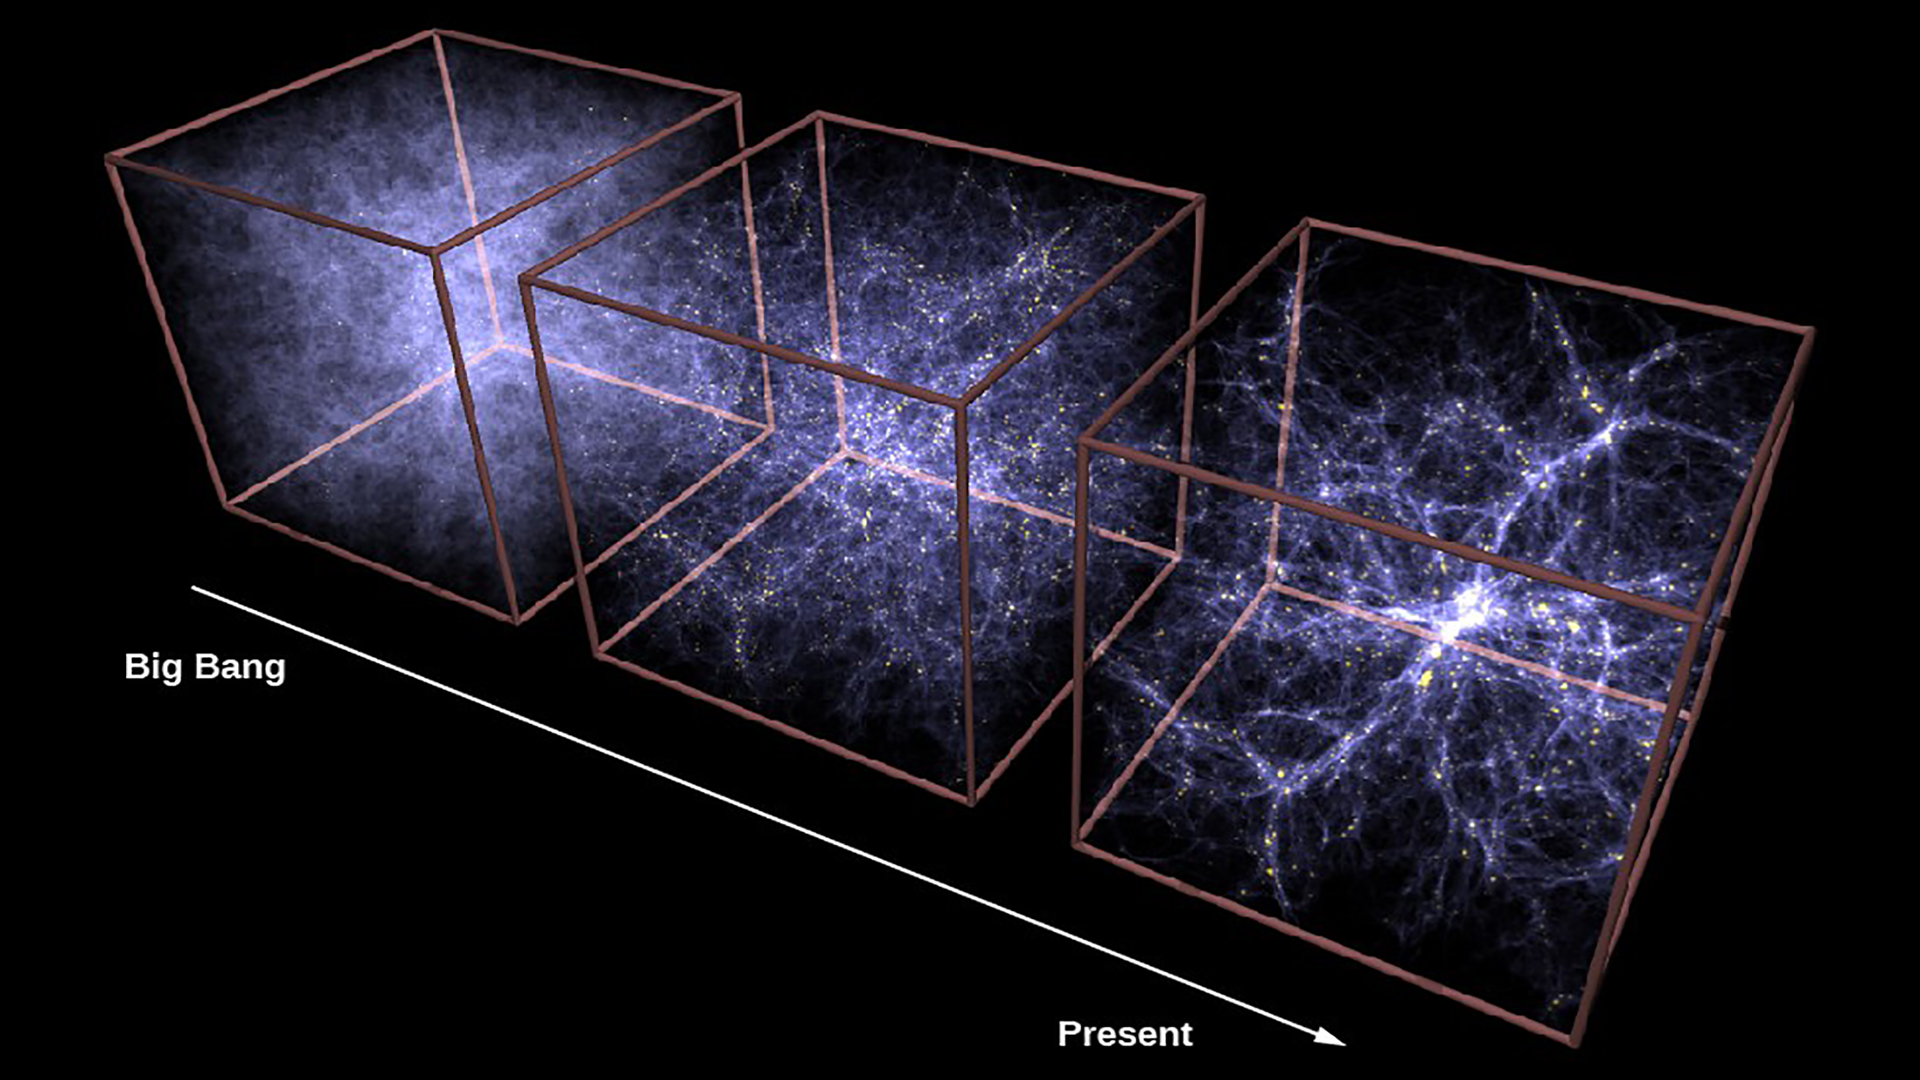 Axion dark matter: What is it and why now?